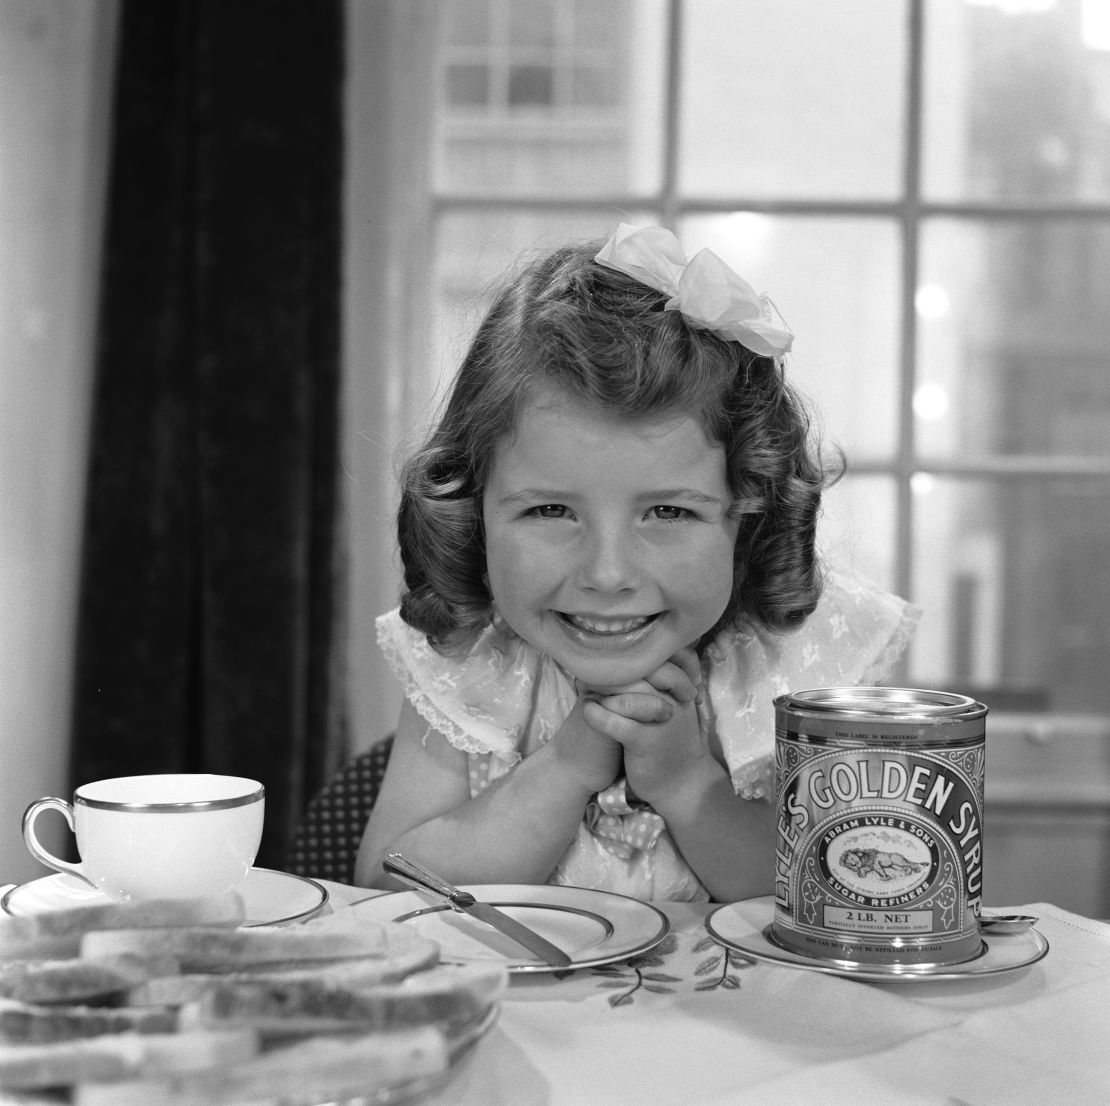 The product has been a staple in the pantries of British bakers since it's inception. Above, a young girl about to spread the syrup on bread in 1957.